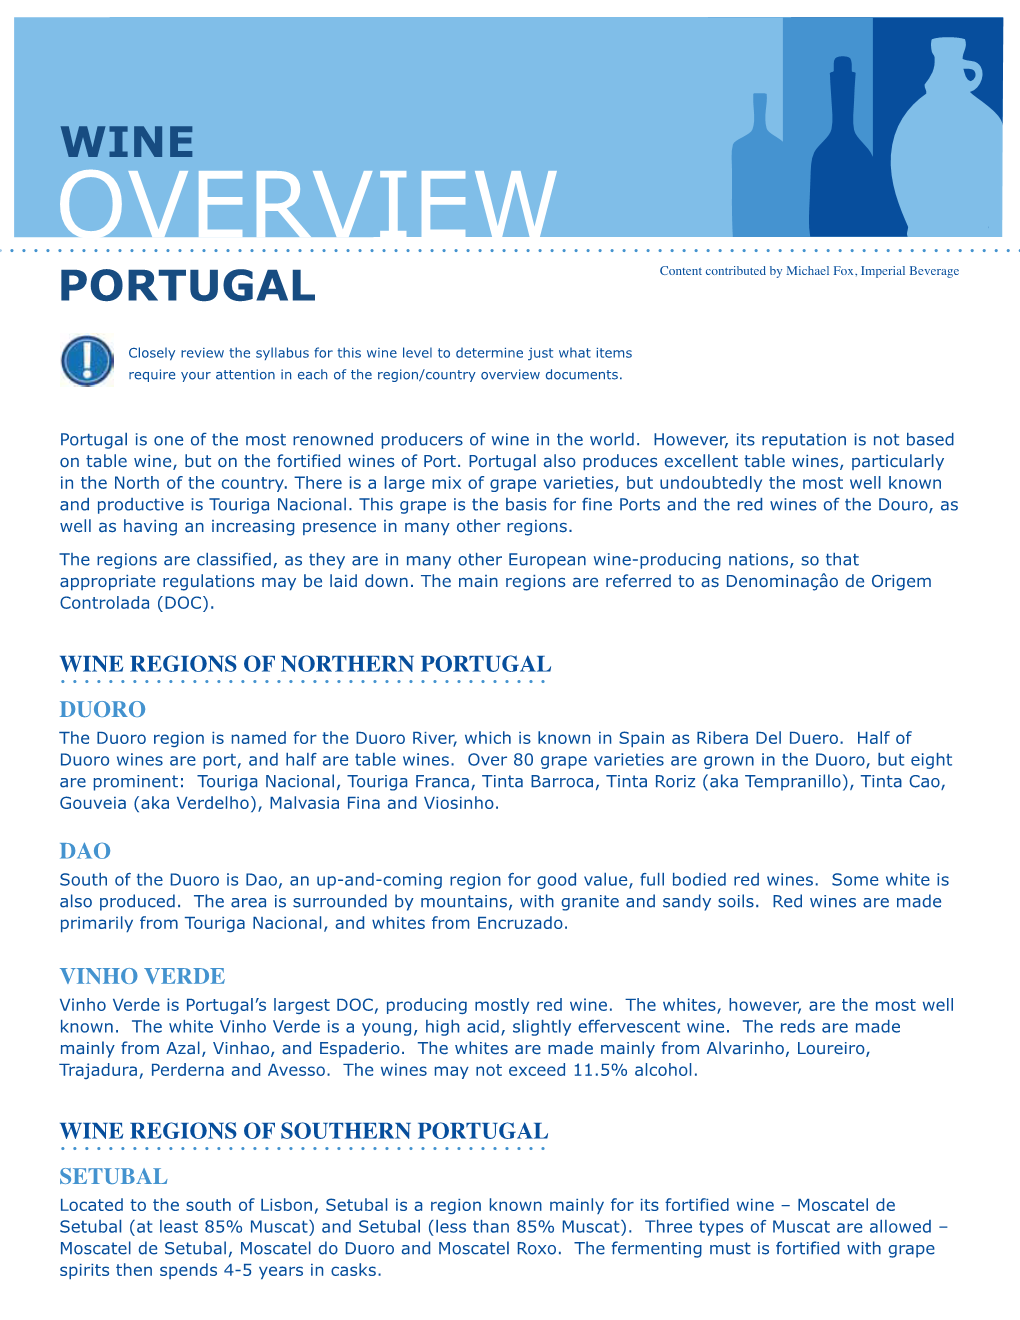 OVERVIEW PORTUGAL Content Contributed by Michael Fox, Imperial Beverage